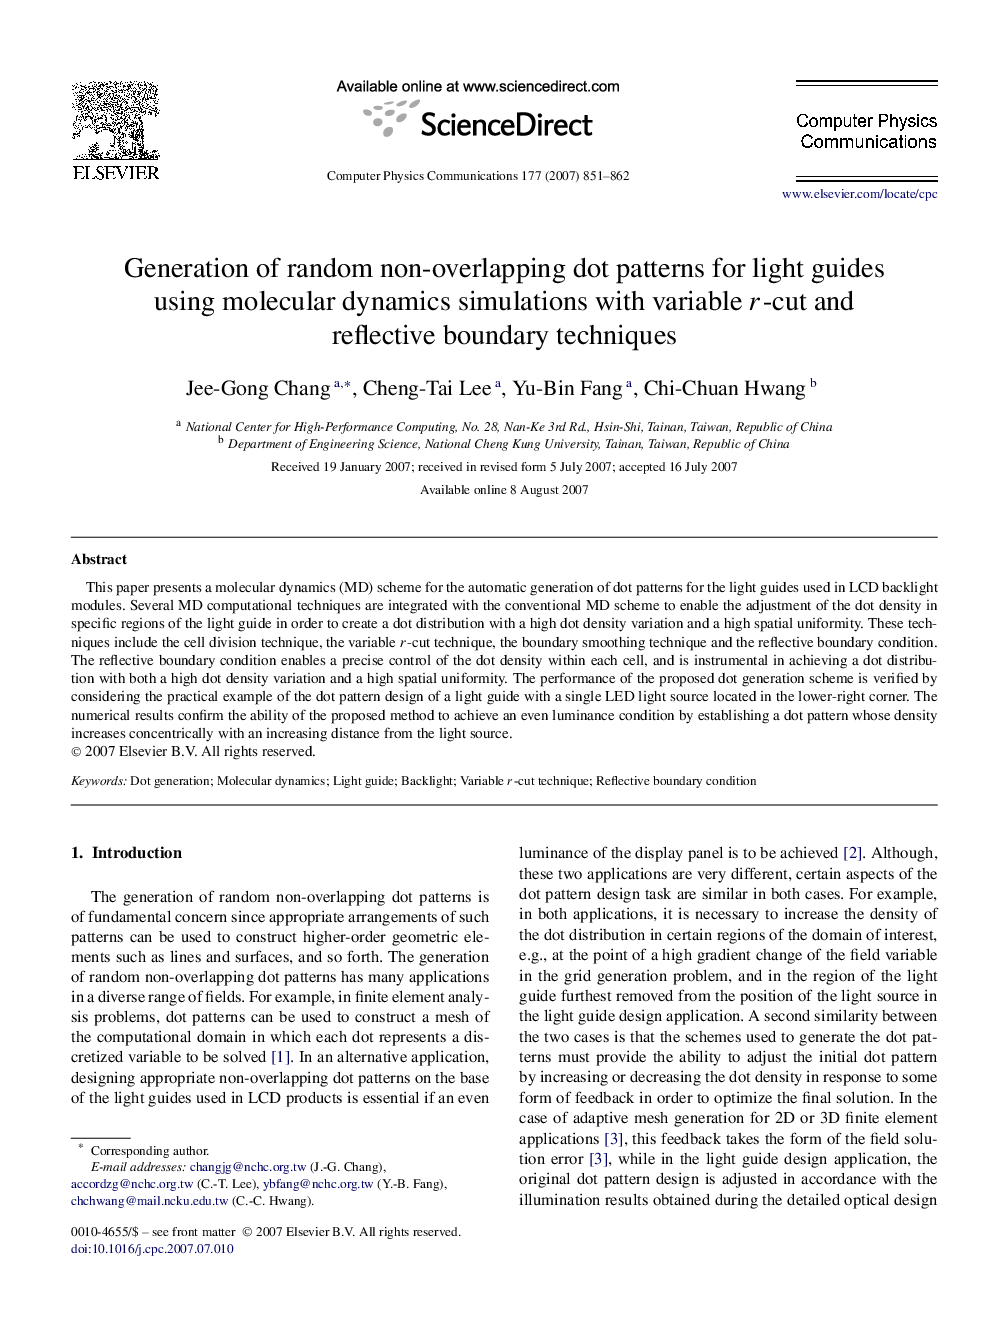 Generation of random non-overlapping dot patterns for light guides using molecular dynamics simulations with variable r-cut and reflective boundary techniques